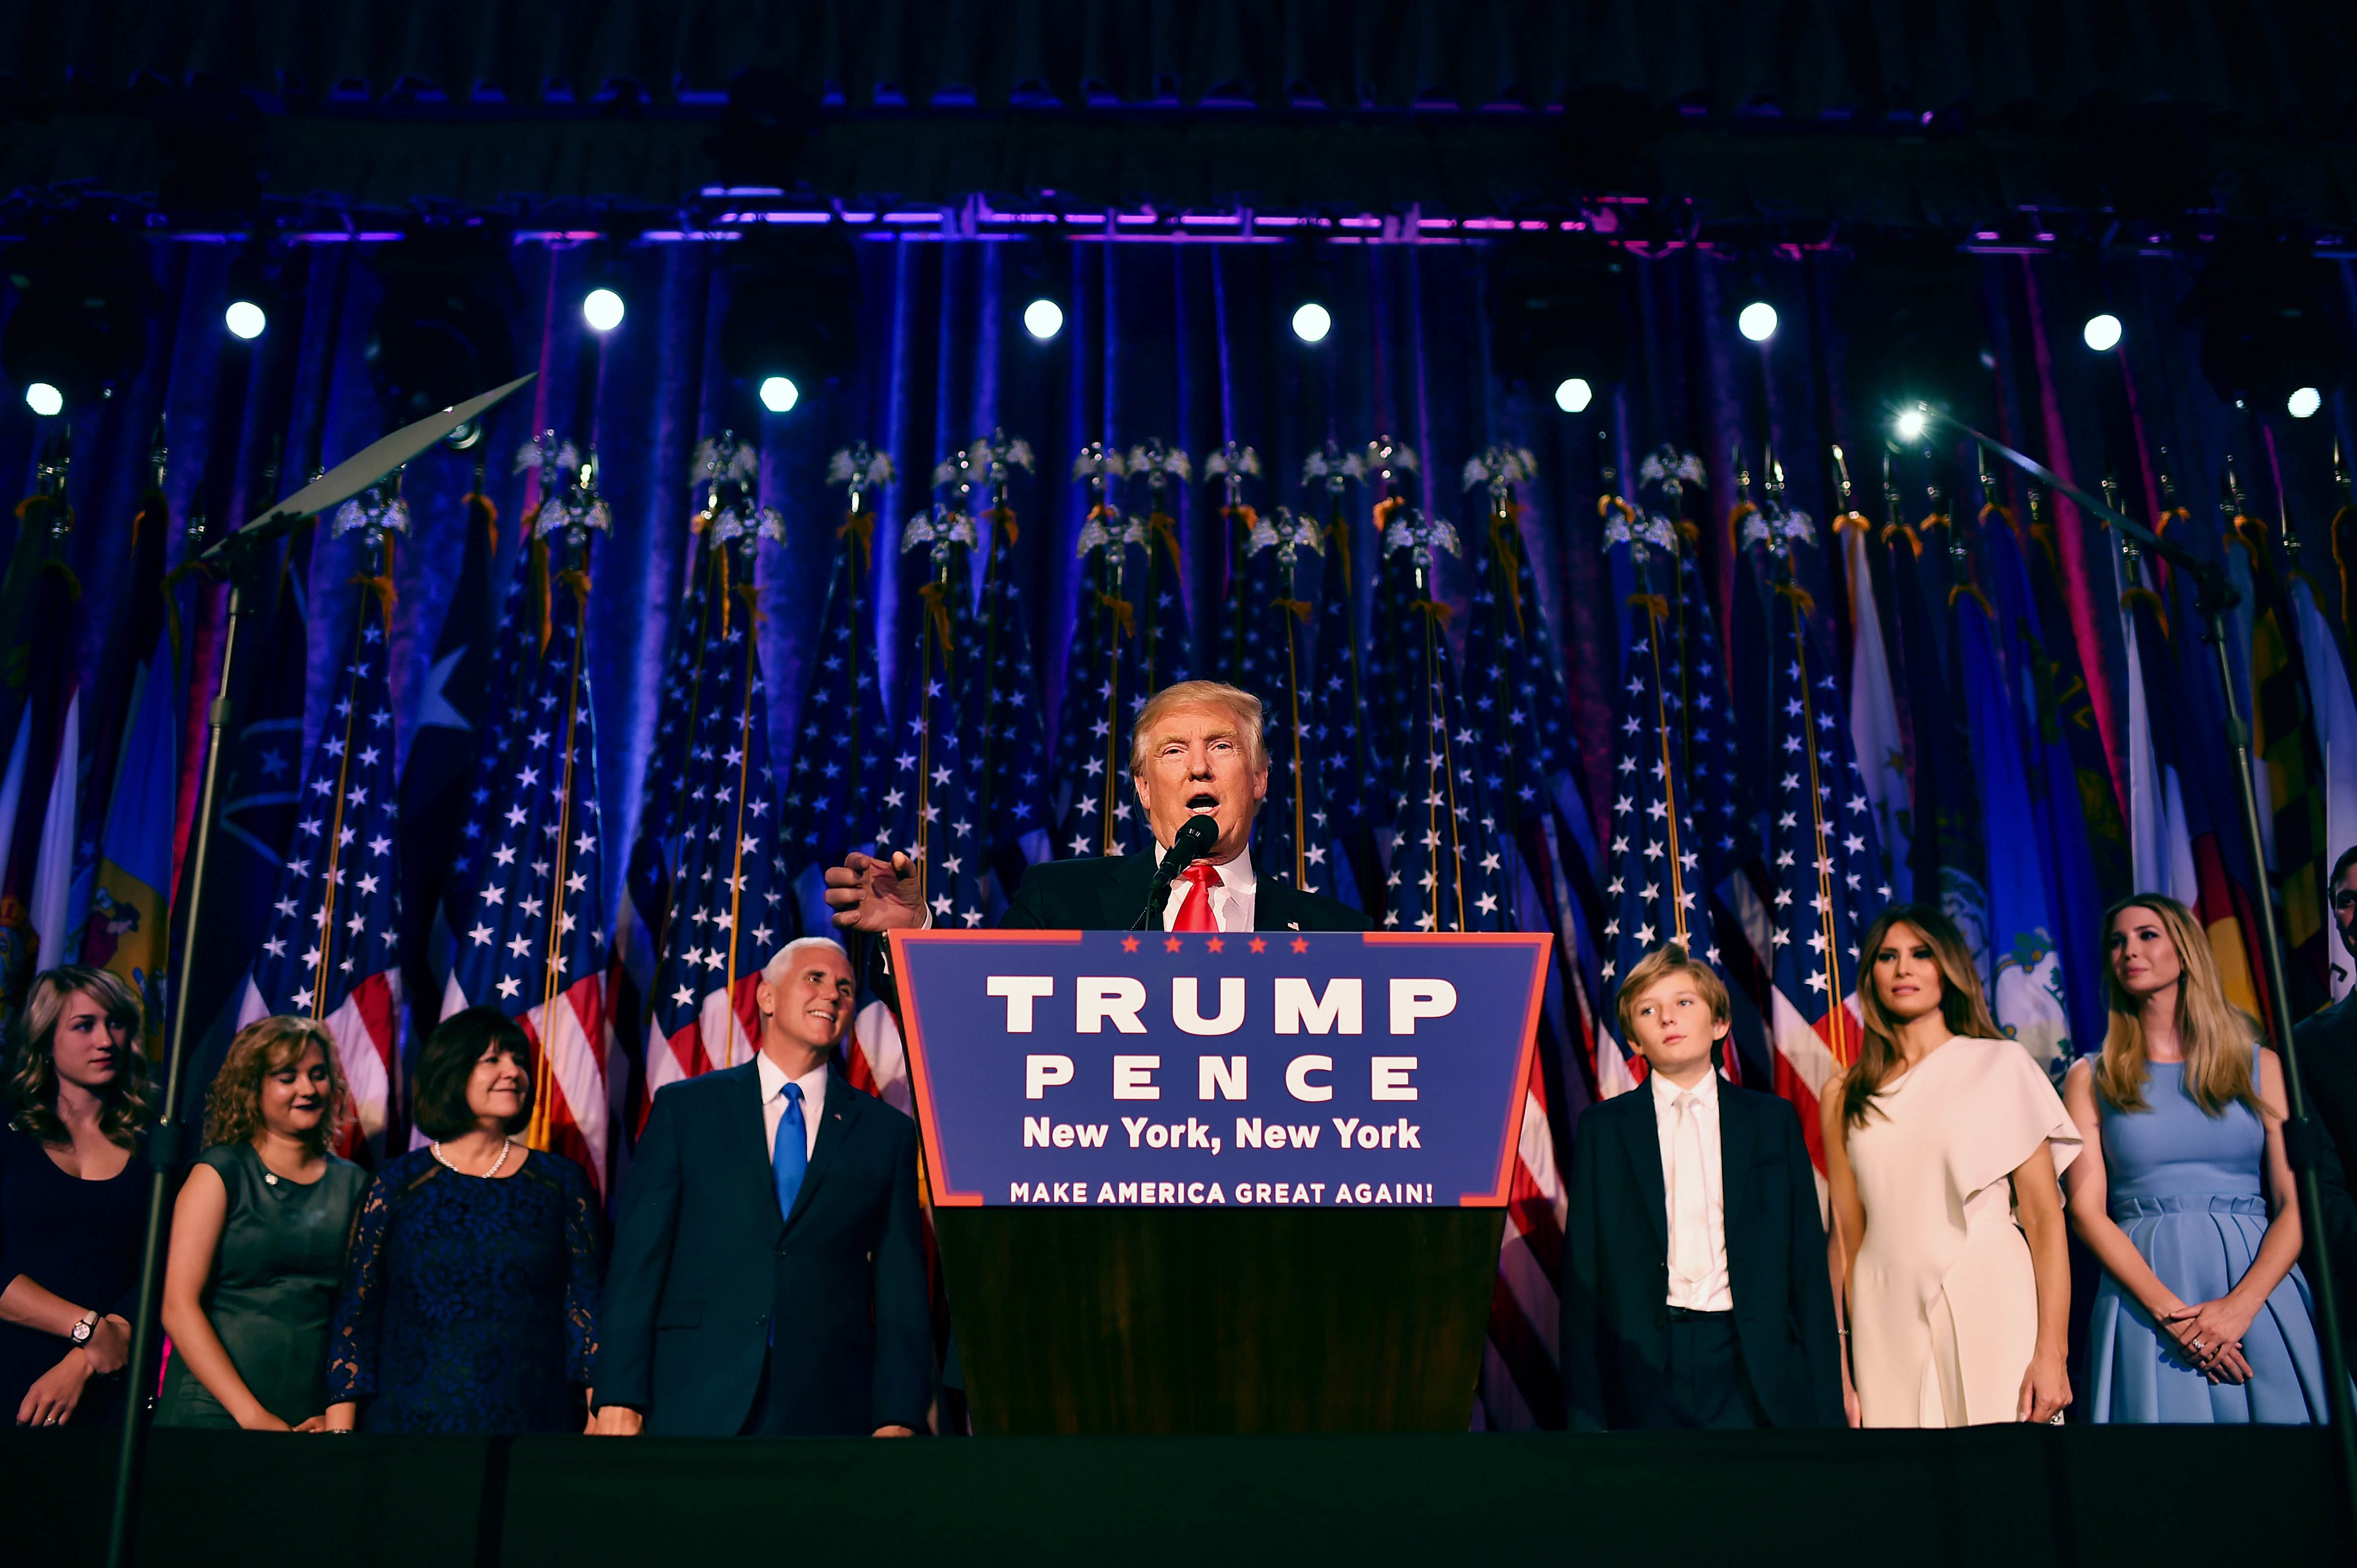 President-elect Donald Trump, with his family, addresses supporters at an election night event at the New York Hilton Midtown November 8, 2016 in New York City, New York. (Jabin Botsford&mdash;The Washington Post/Getty Images)